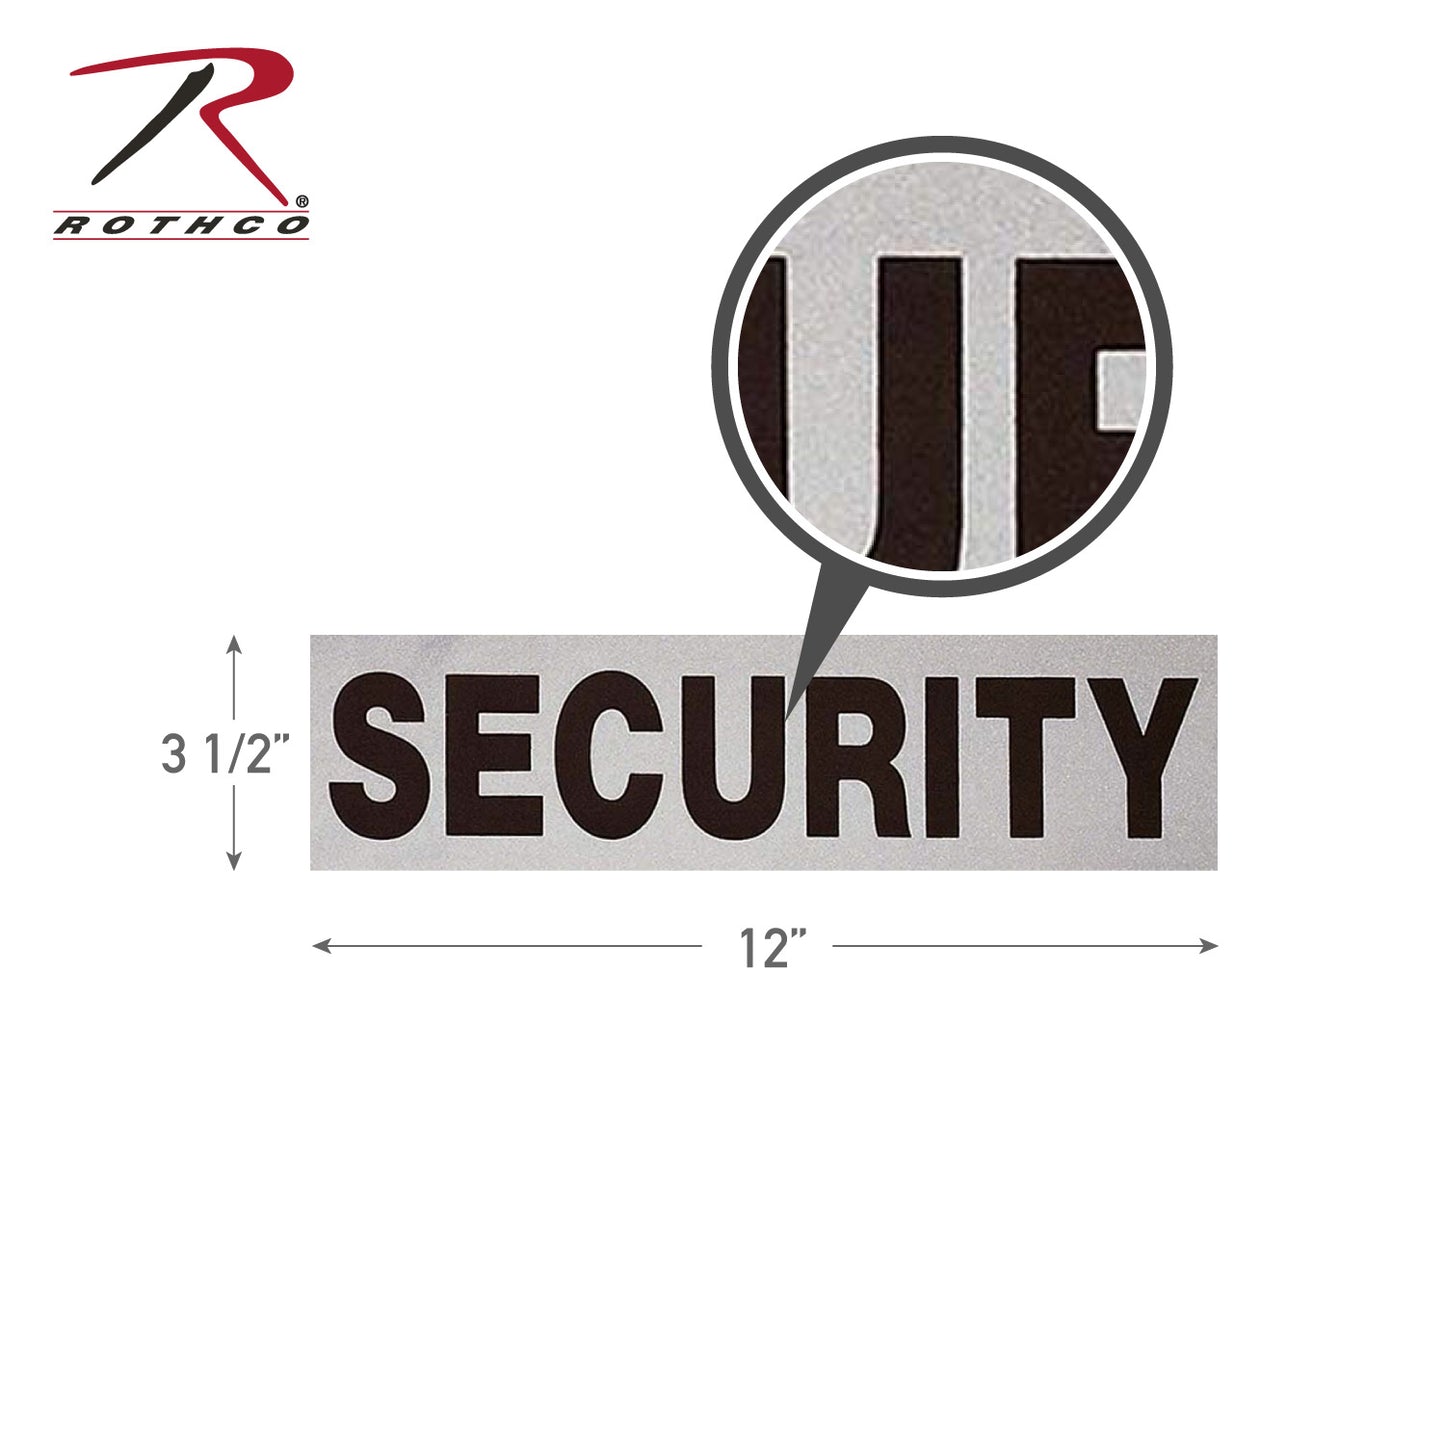 Rothco Reflective Security Patch